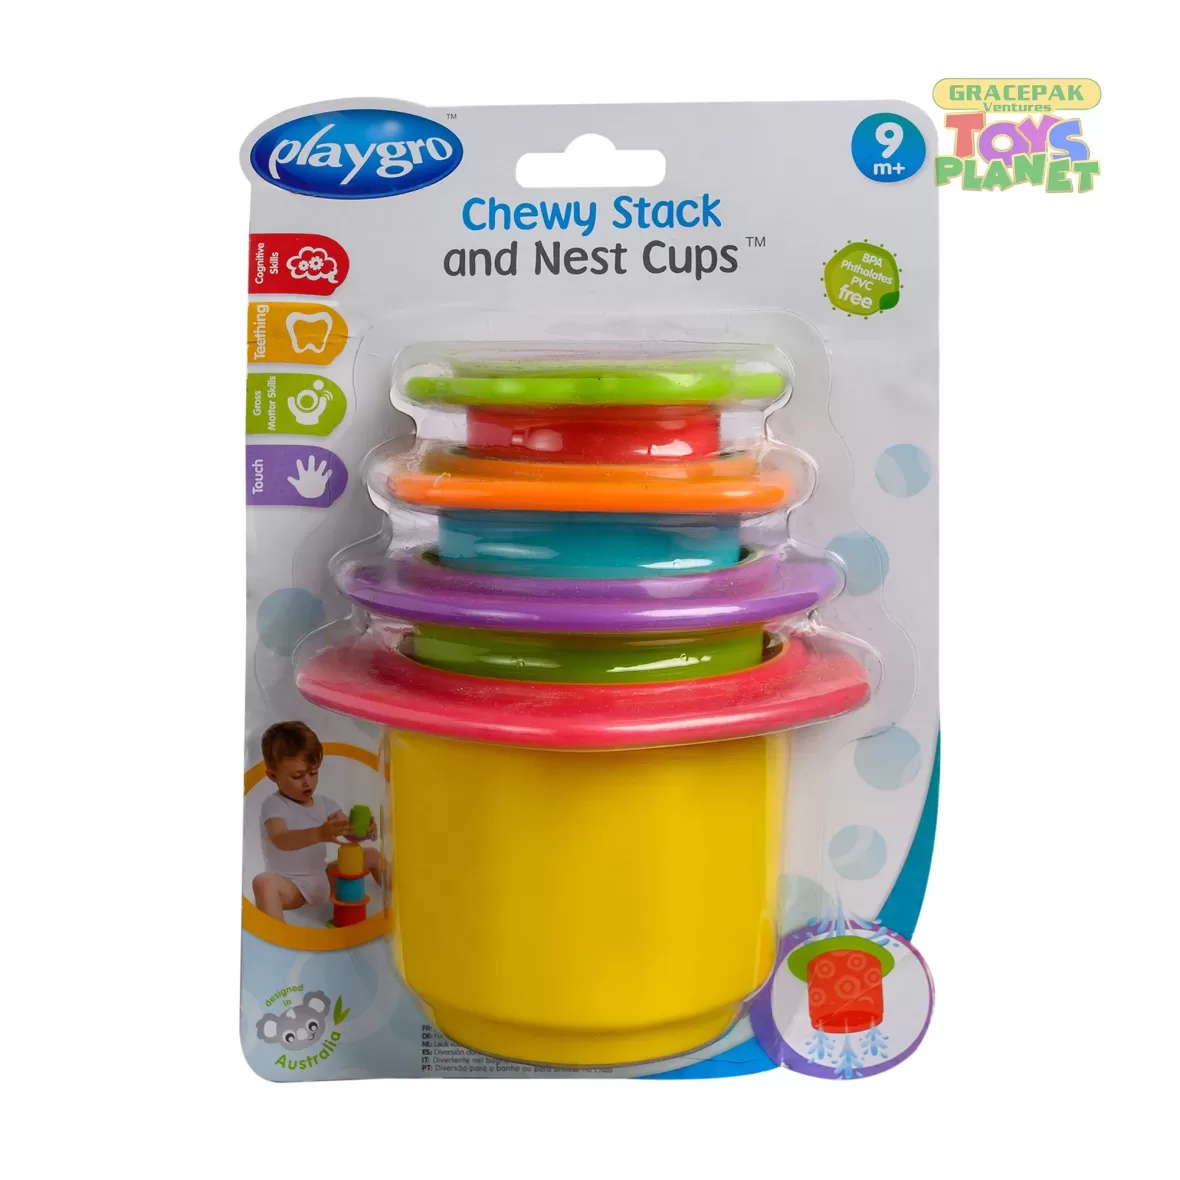 Chewy Stack and Nest Cups